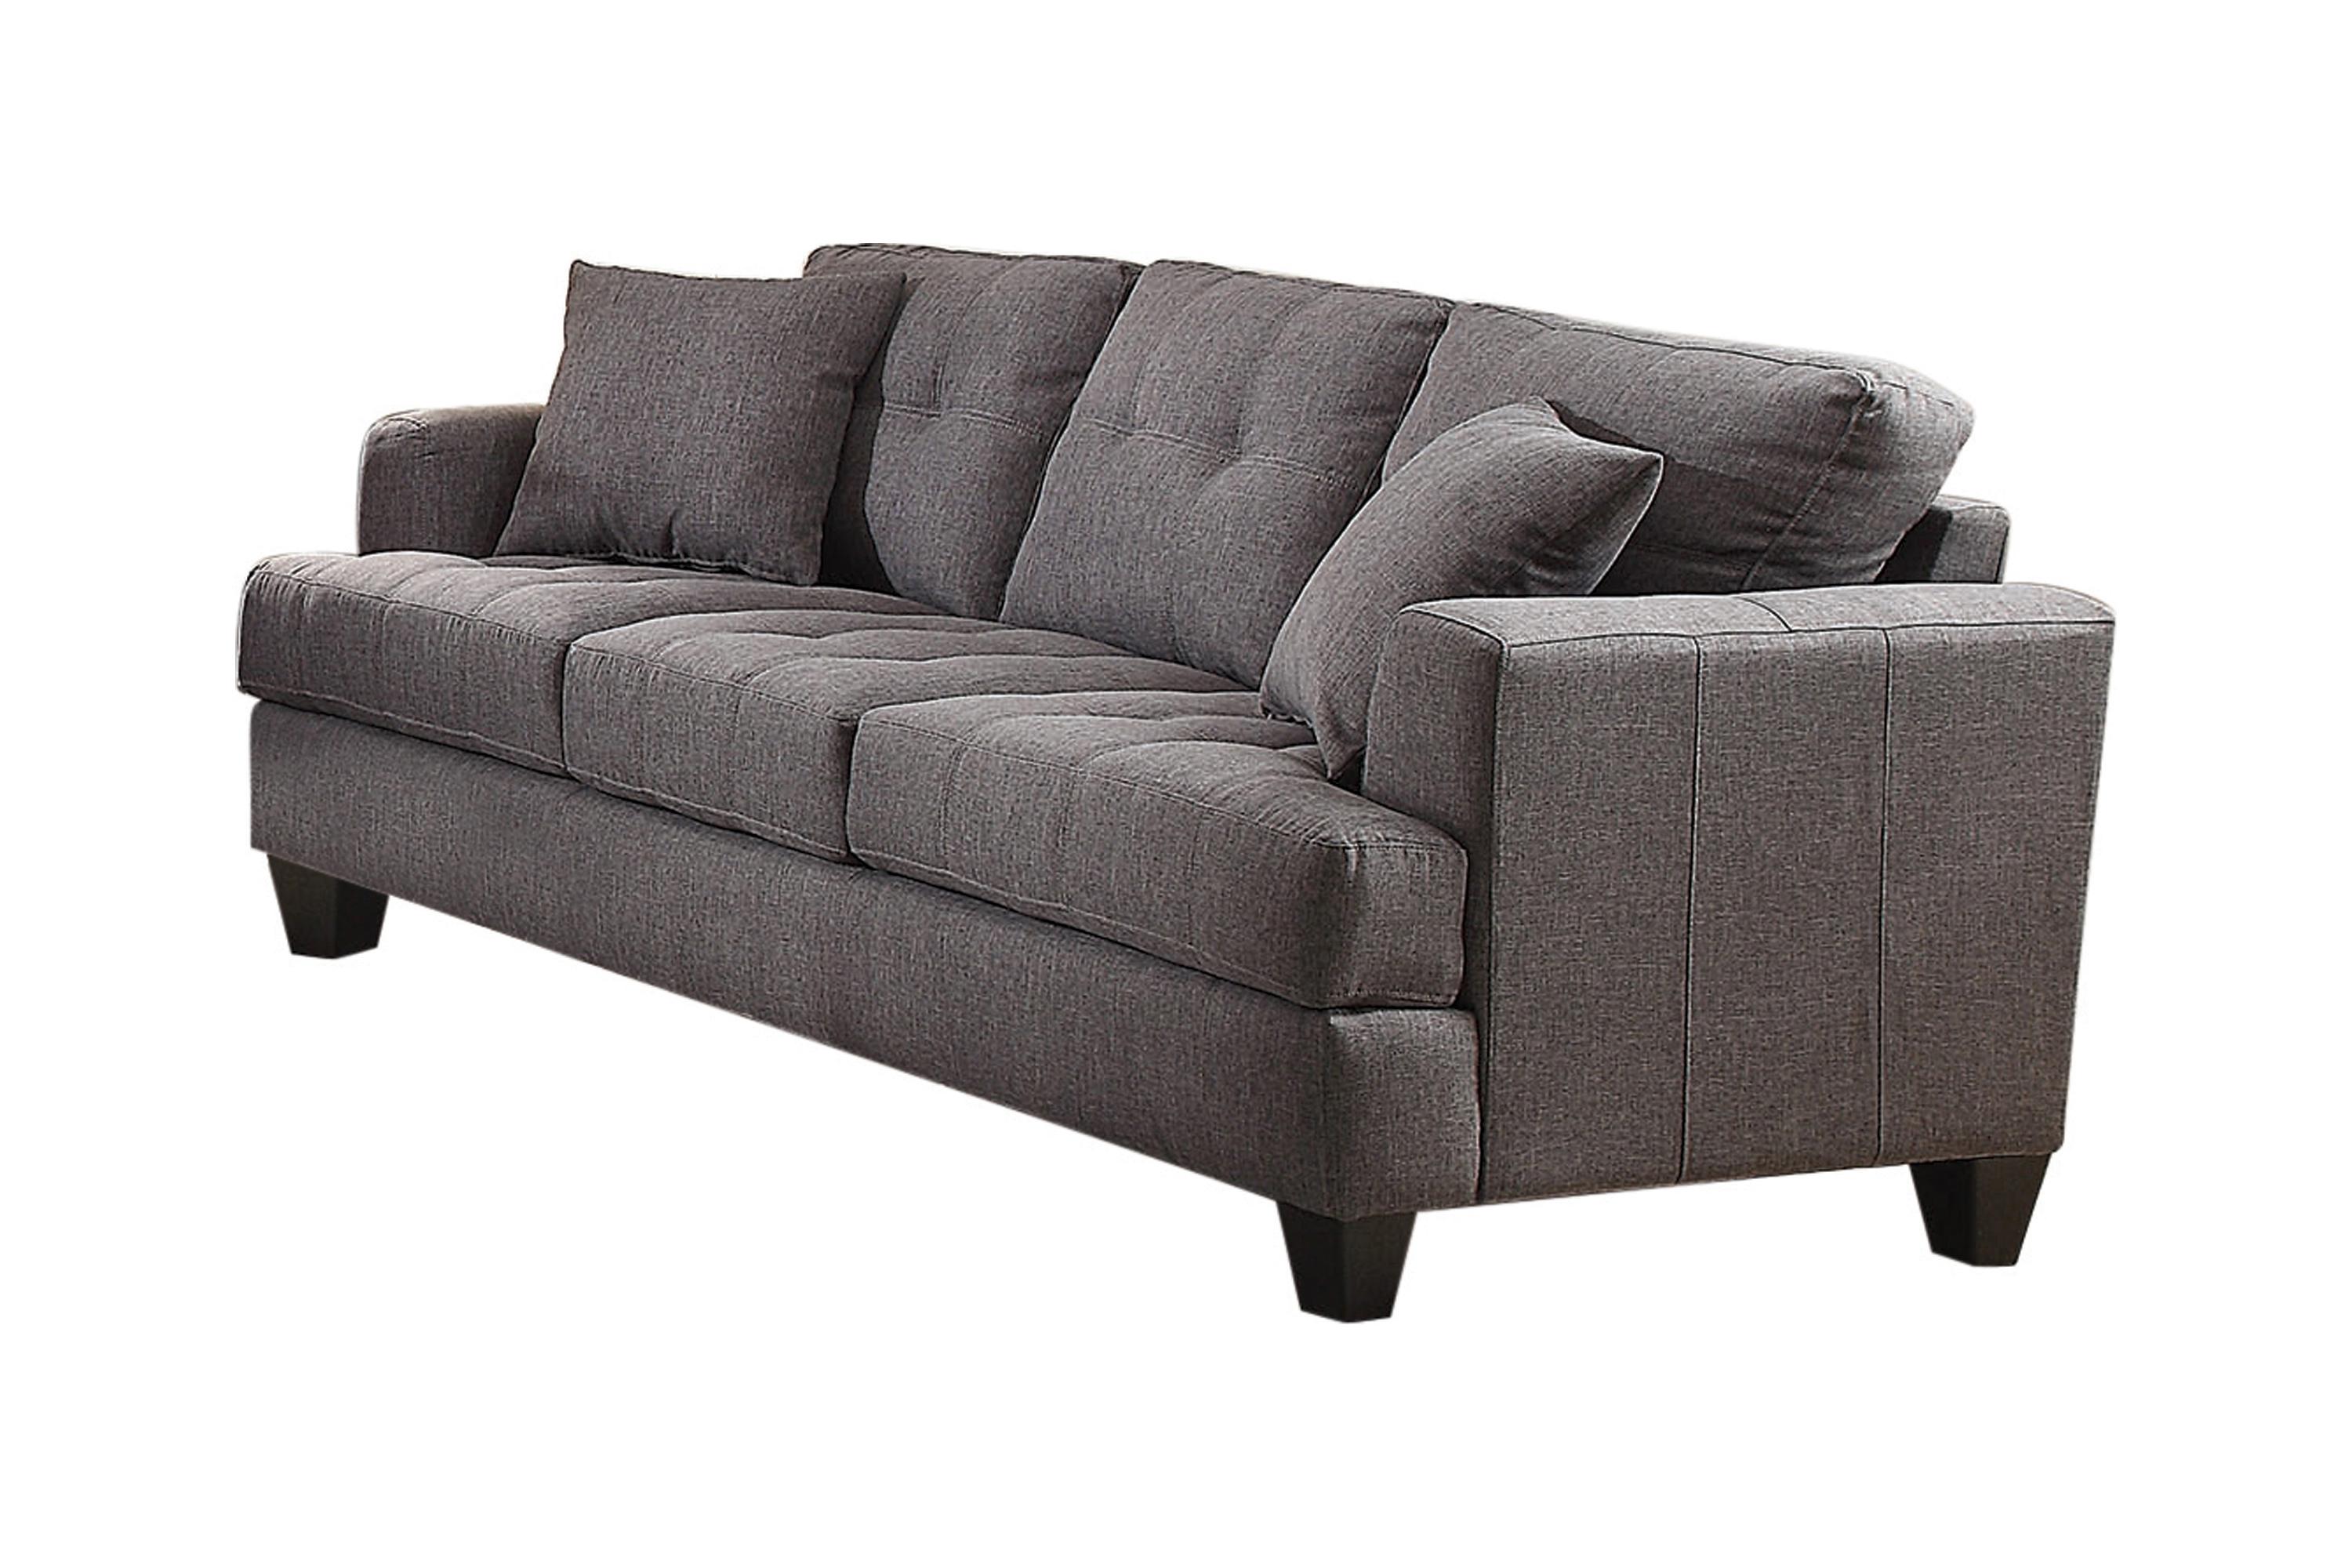 Transitional Sofa 505175 Samuel 505175 in Charcoal 